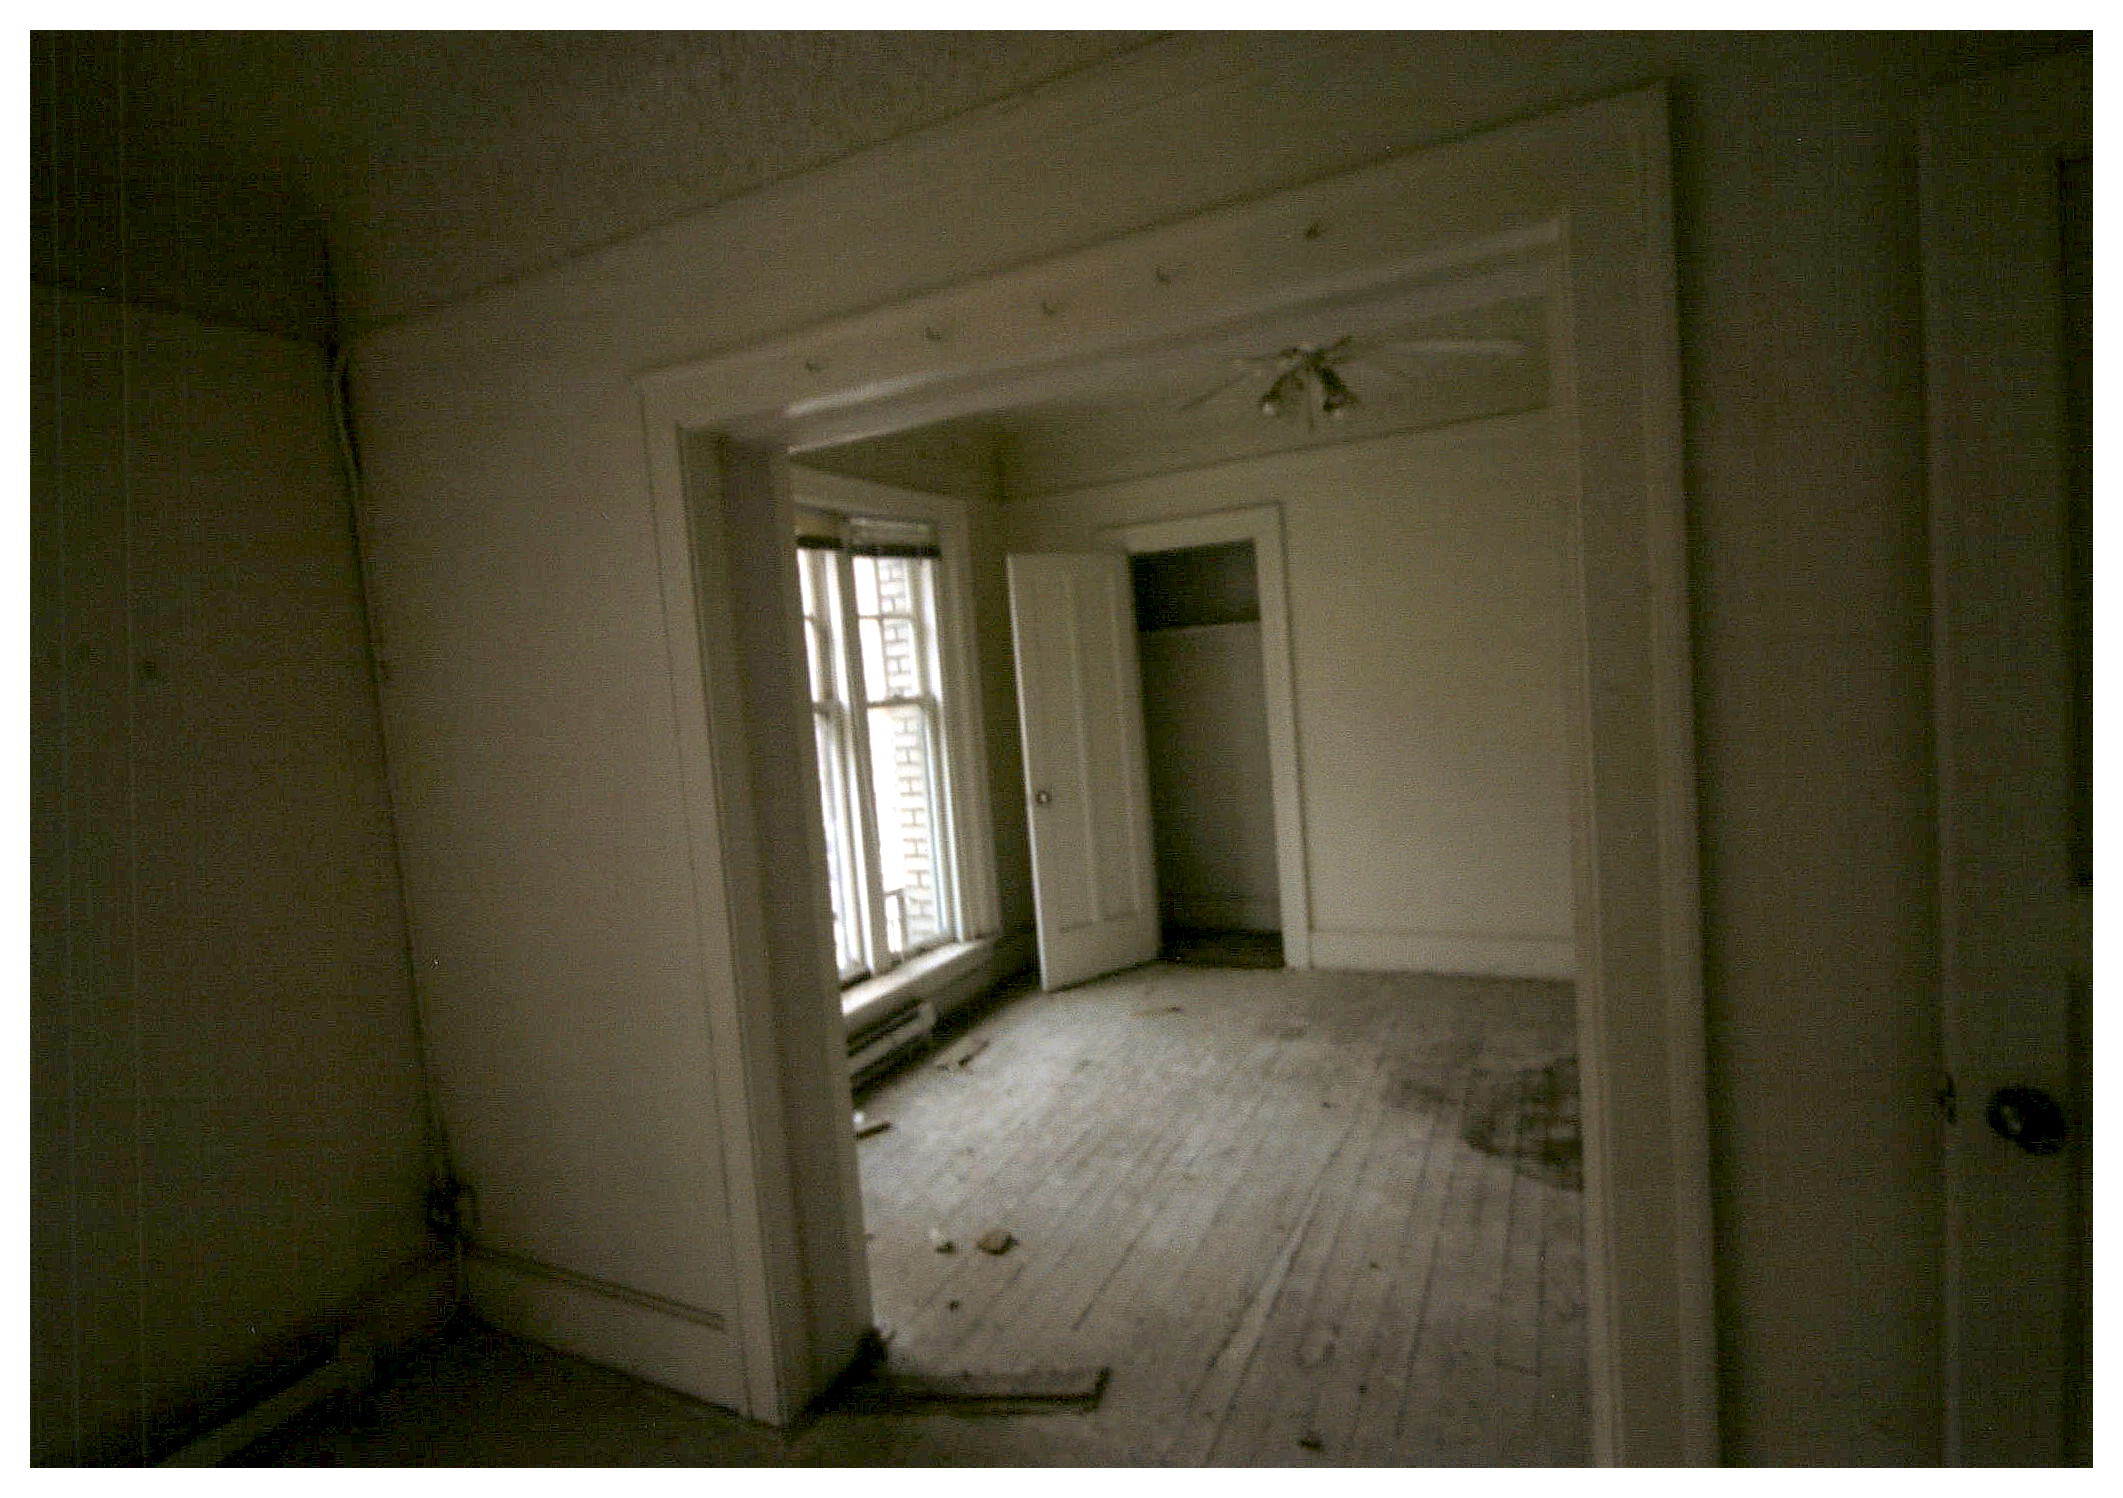 Before: view of living area from bedroom showing poor condition of wood floor.